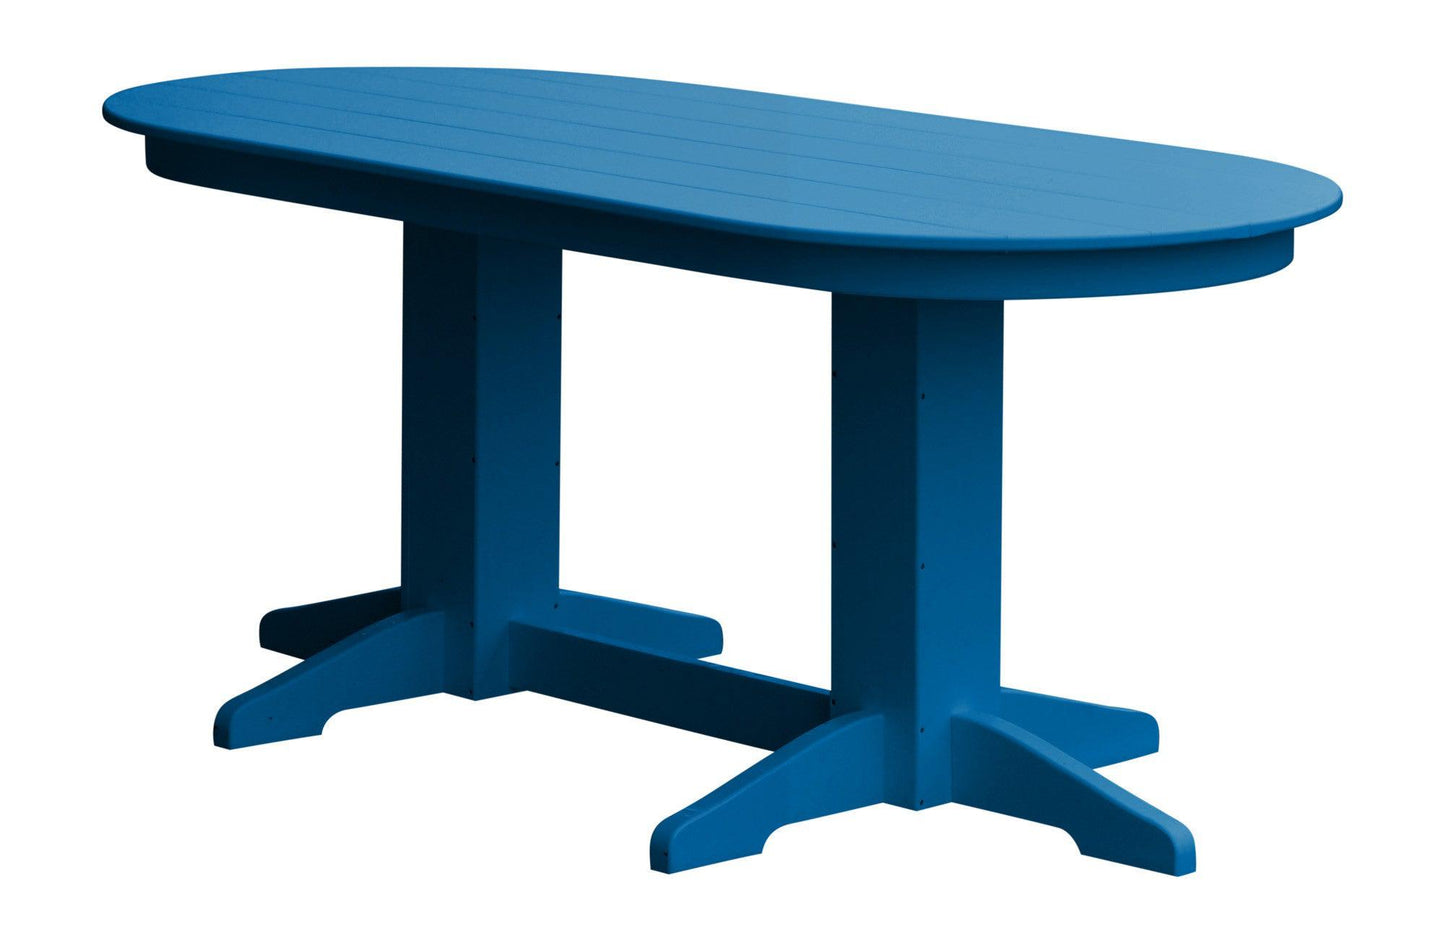 A&L Furniture Company Recycled Plastic 6' Oval Dining Table - Blue